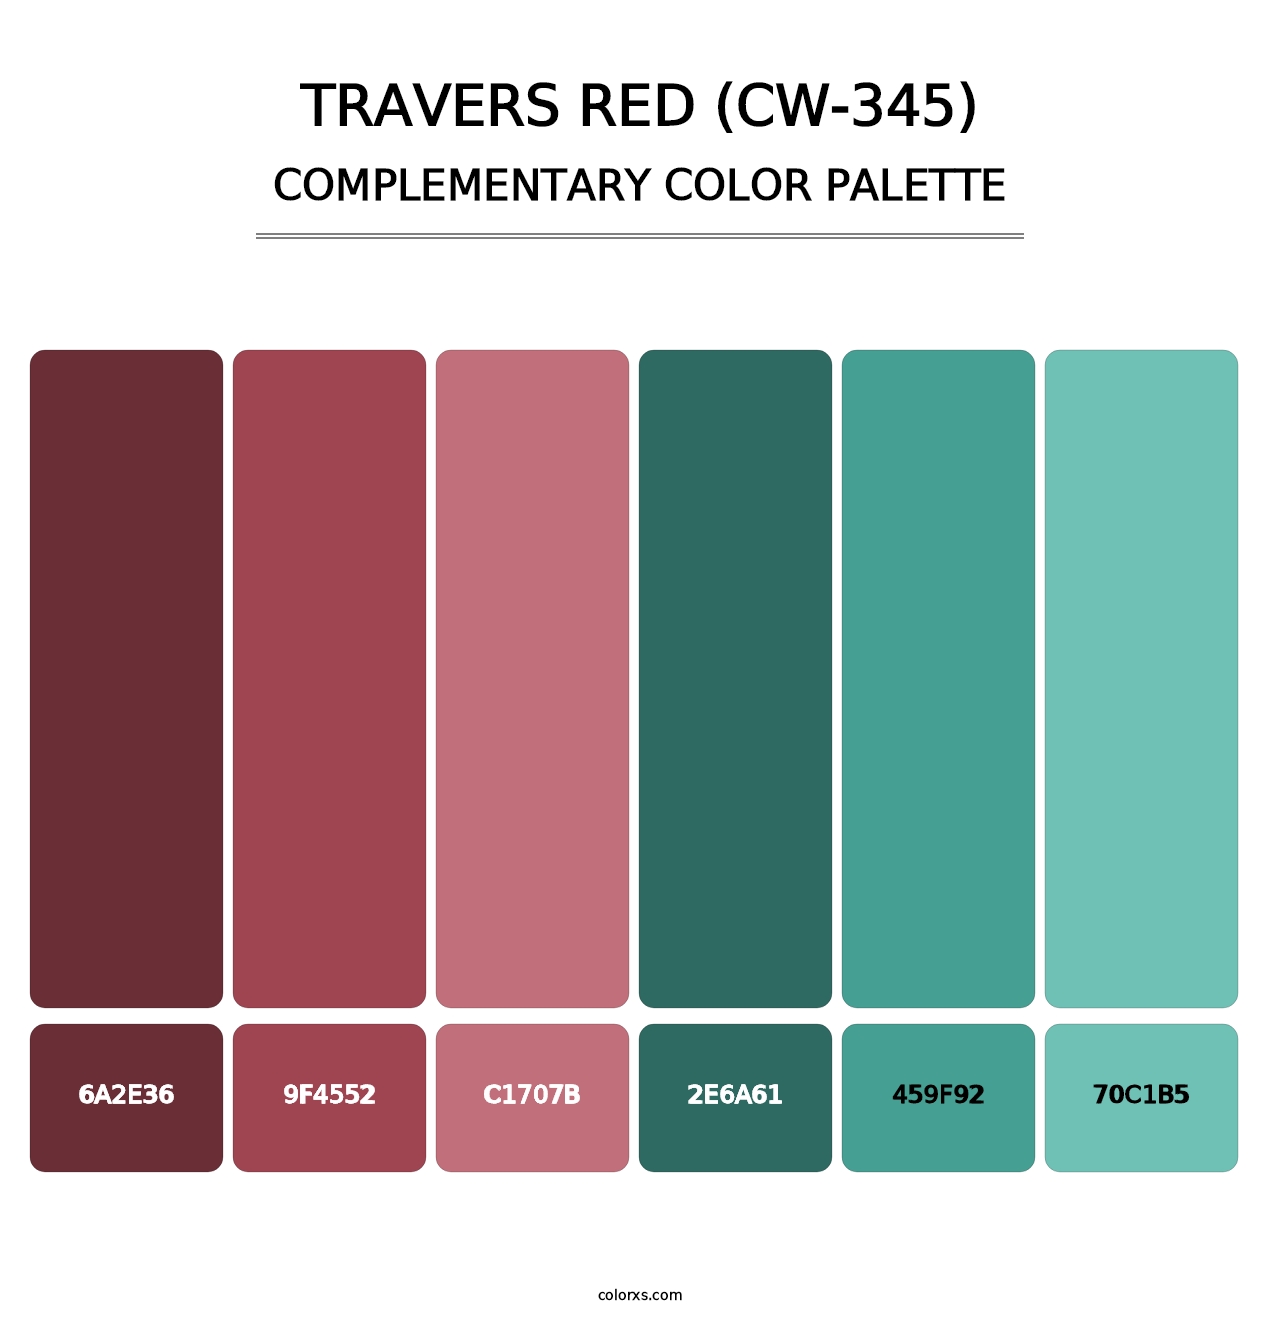 Travers Red (CW-345) - Complementary Color Palette